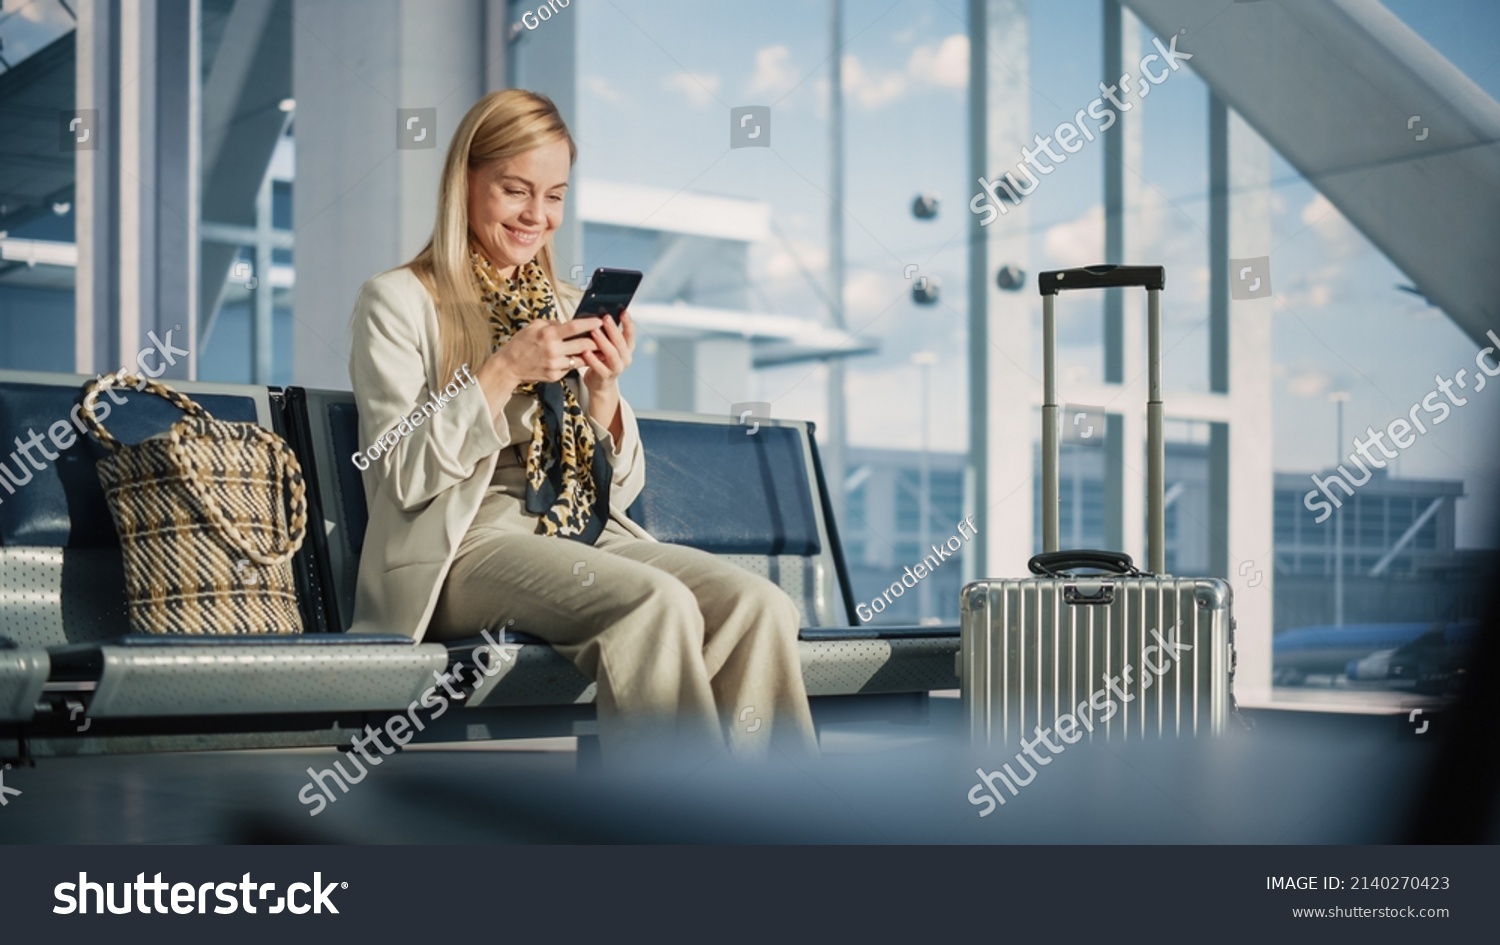 Airport Terminal: Woman Waits for Flight, Uses Smartphone, Browse Internet, Social Media, Online Shopping. Traveling Female Remote Work Online on Mobile Phone in a Boarding Lounge of Airline Hub #2140270423